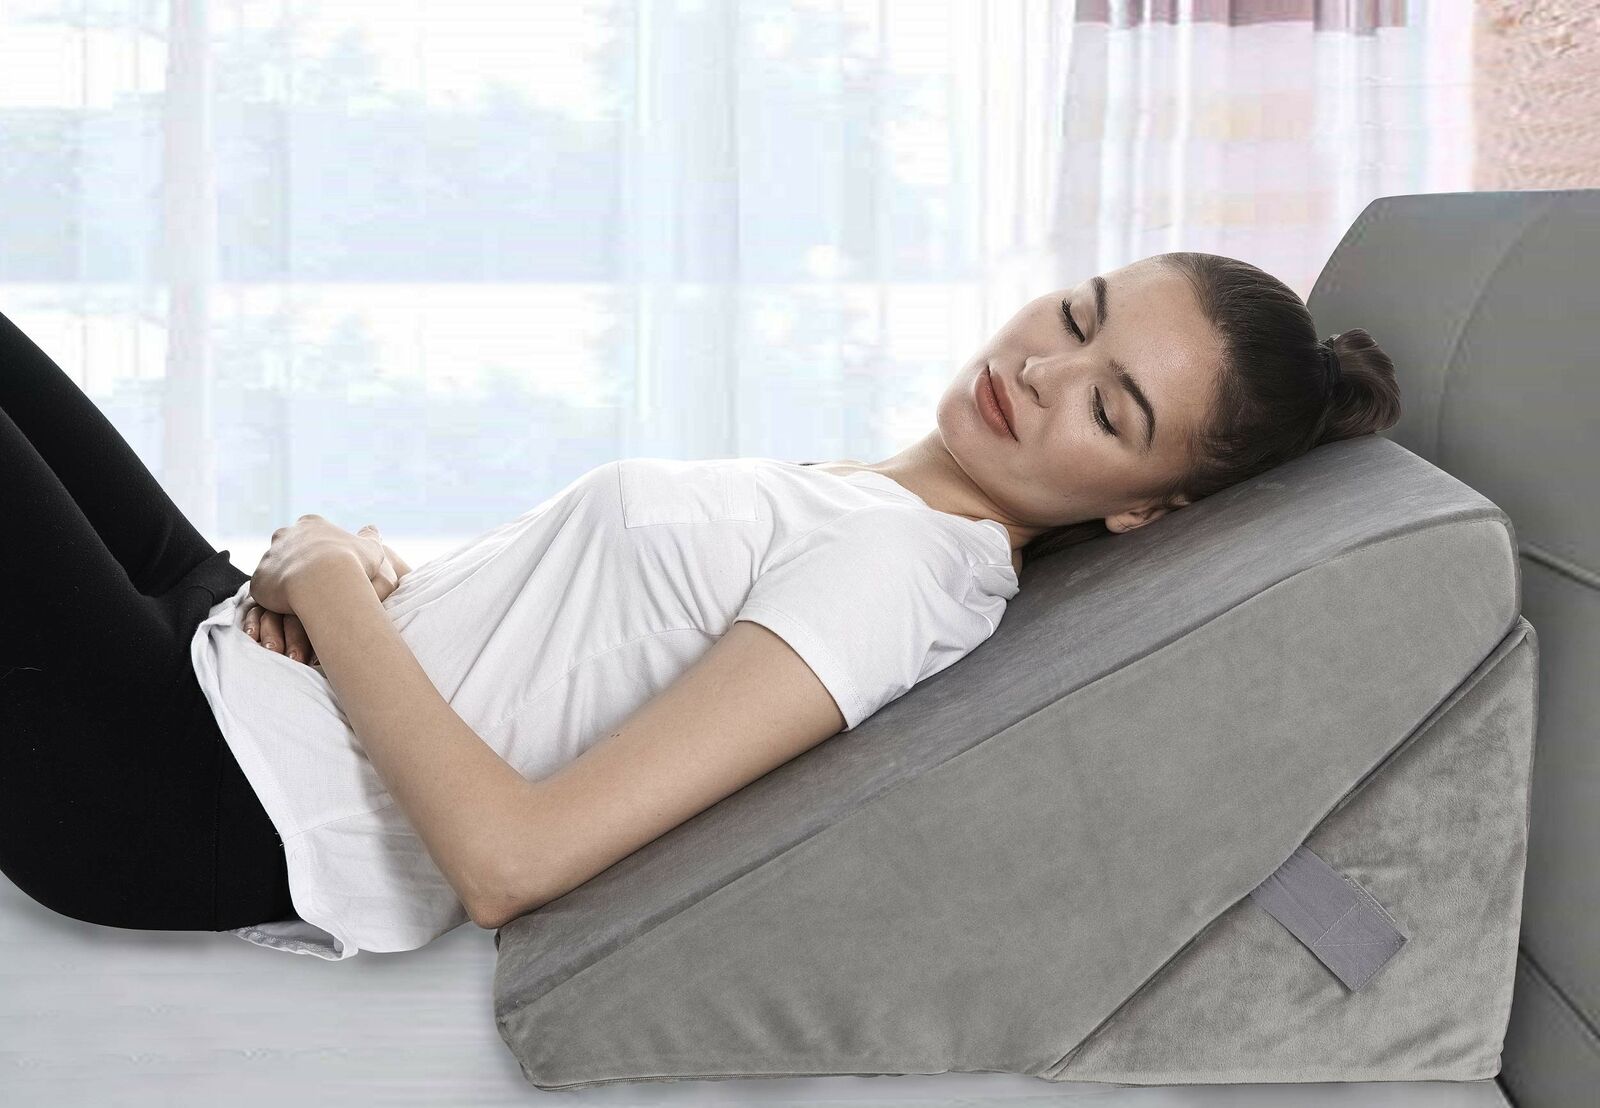 7.5 Wedge Pillow For Acid Reflux - Dr. Recommended Height